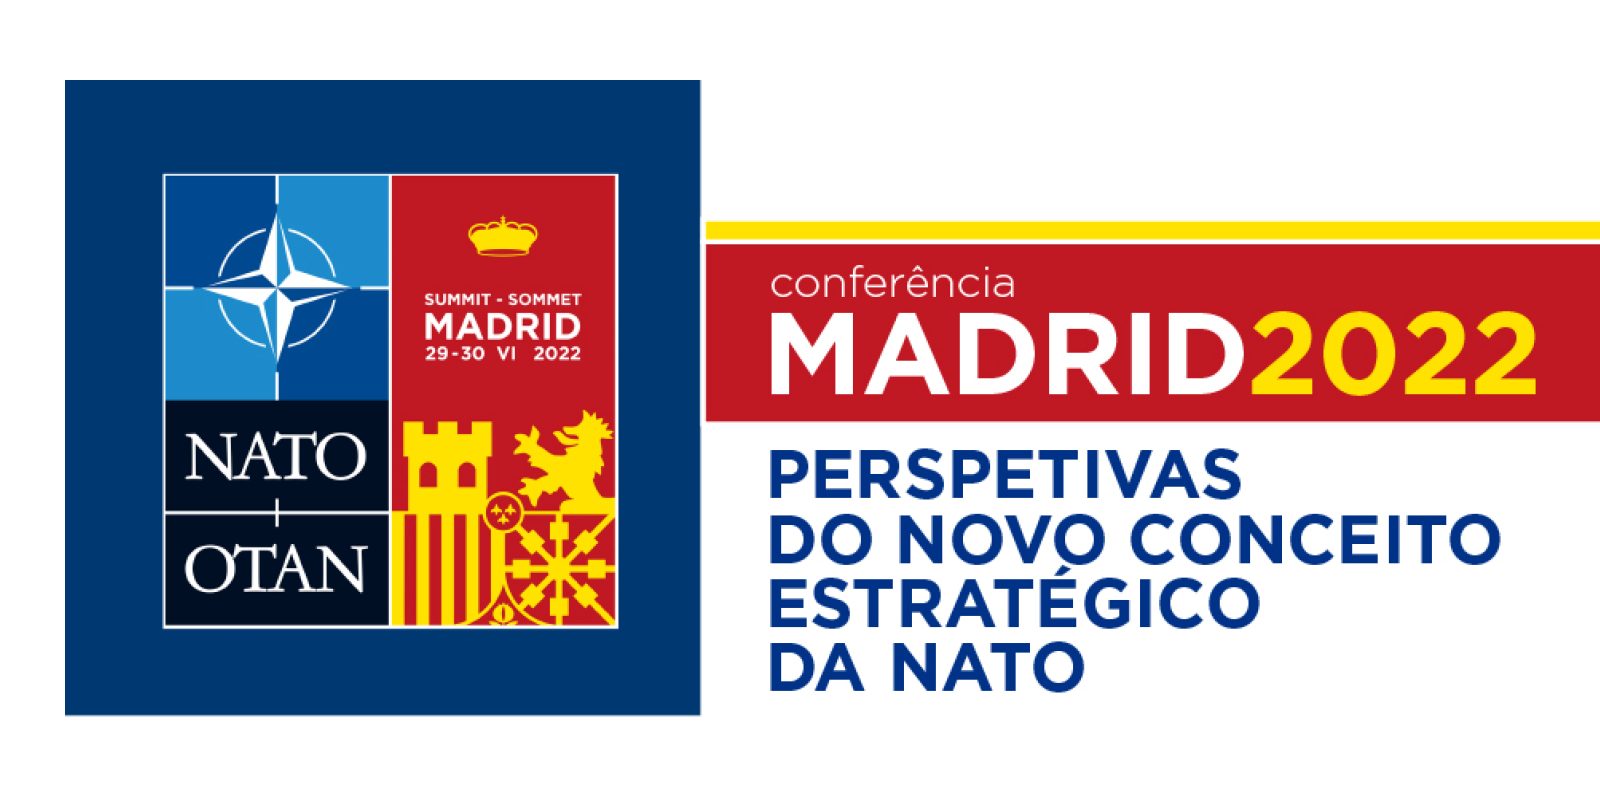 CONFERENCE – MADRID 2022: PERSPECTIVES FOR NATO’S NEW STRATEGIC CONCEPT